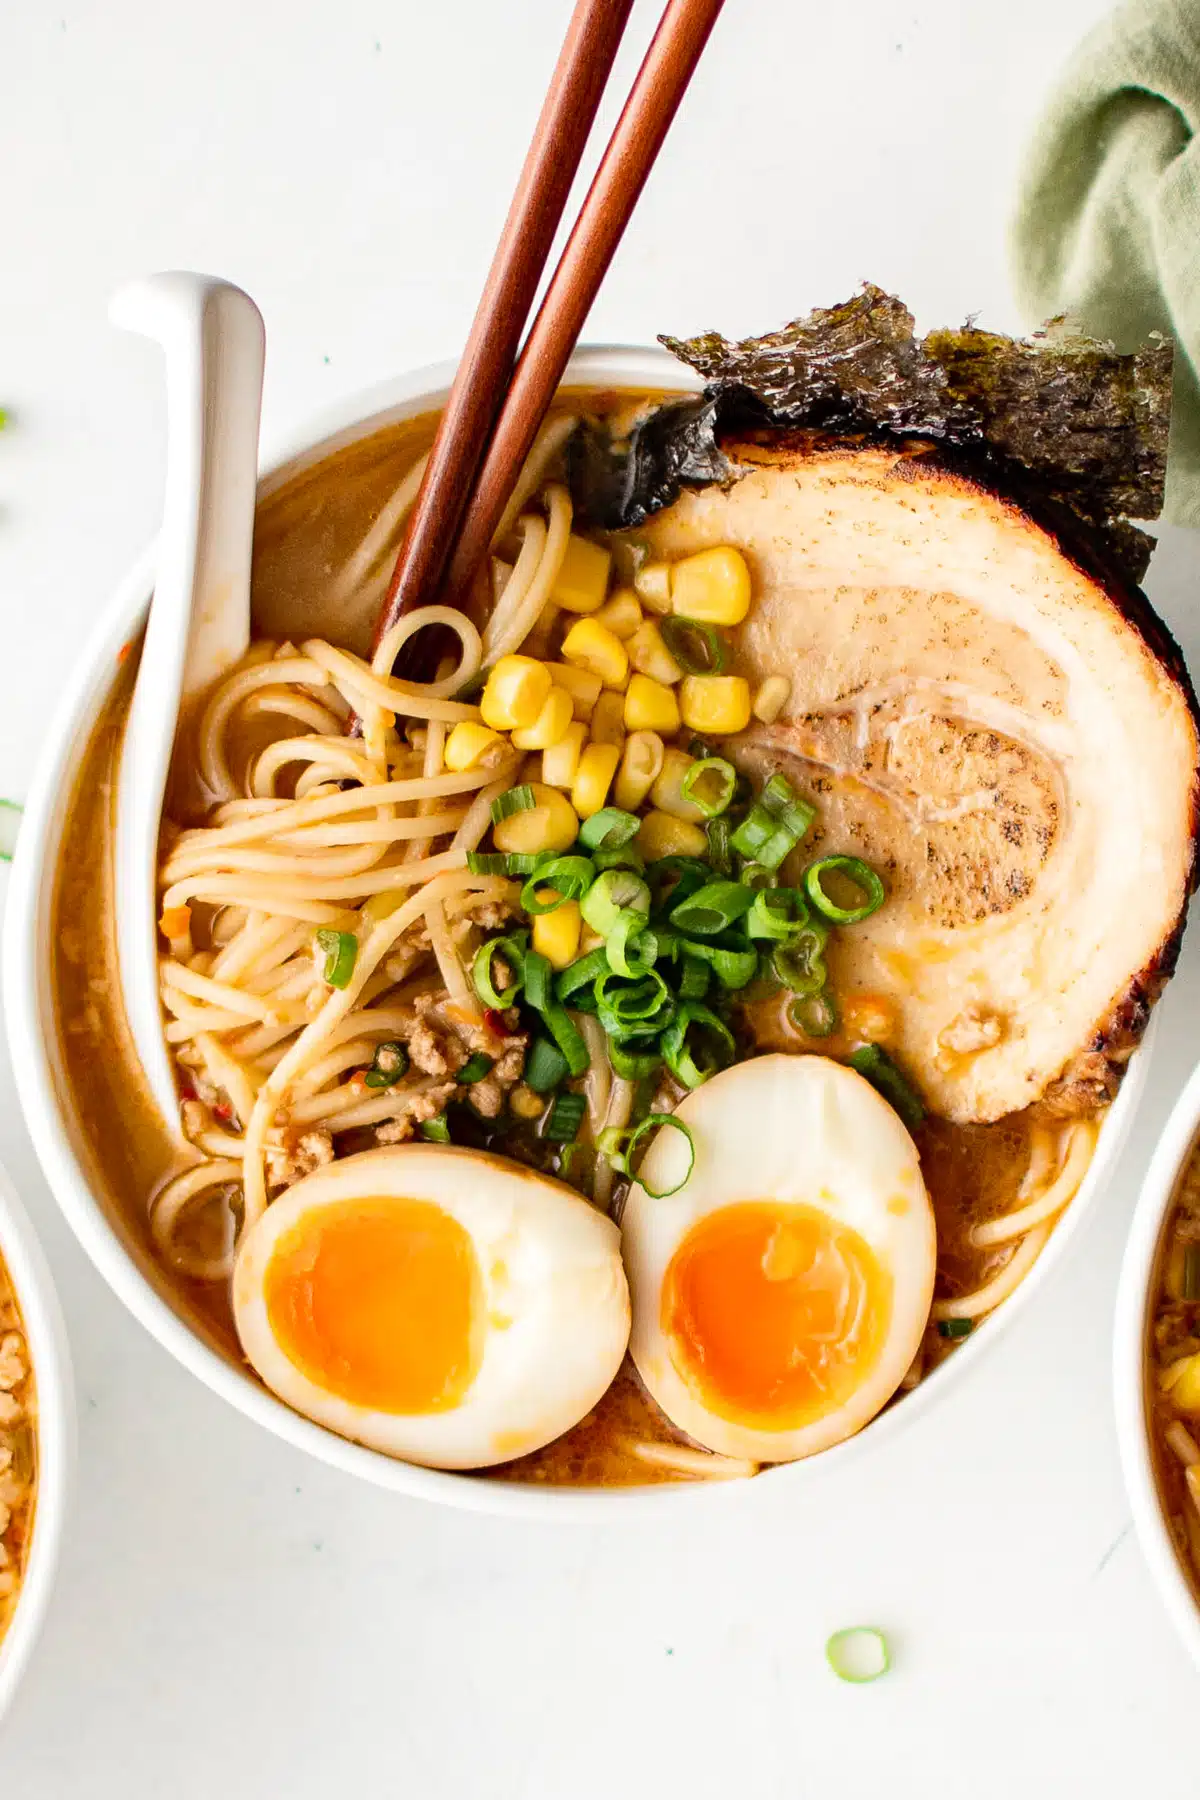 White bowl filled with miso ramen broth and ramen noodles topped with chashu pork, seaweed, ramen egg, corn, and green onions.